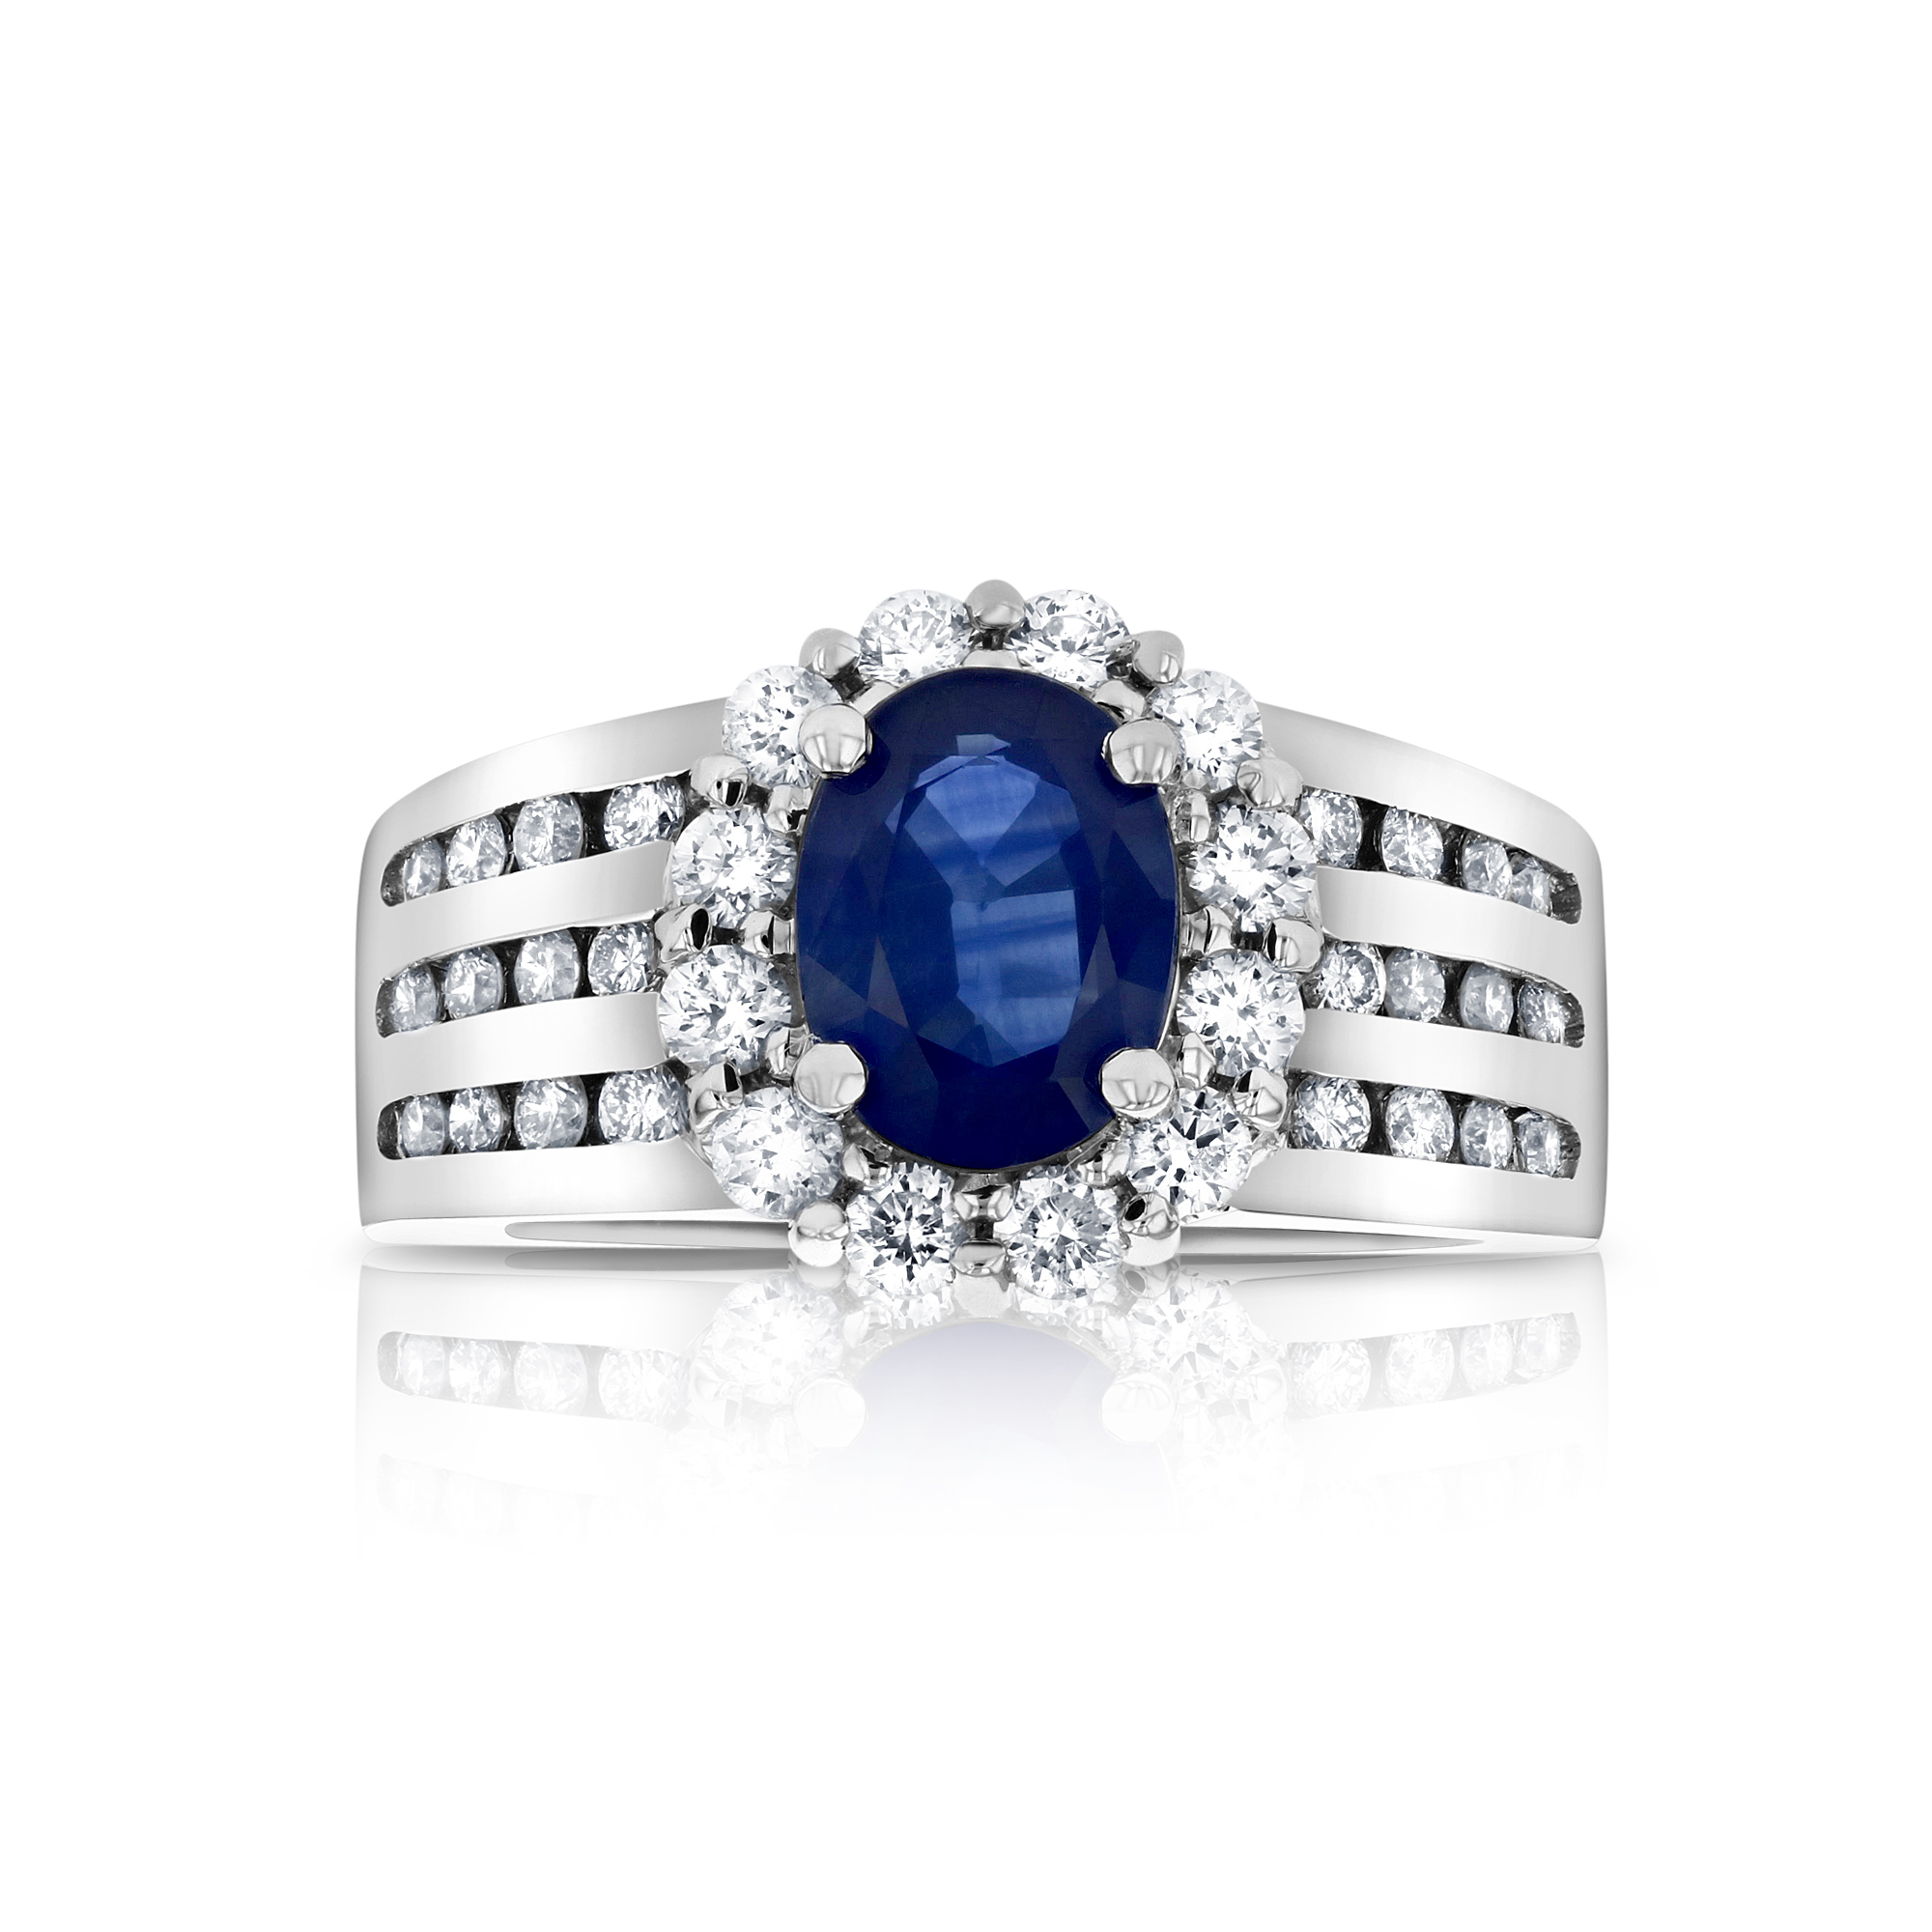 View 0.72ctw Diamonds and Sapphire Ring in 14k Gold